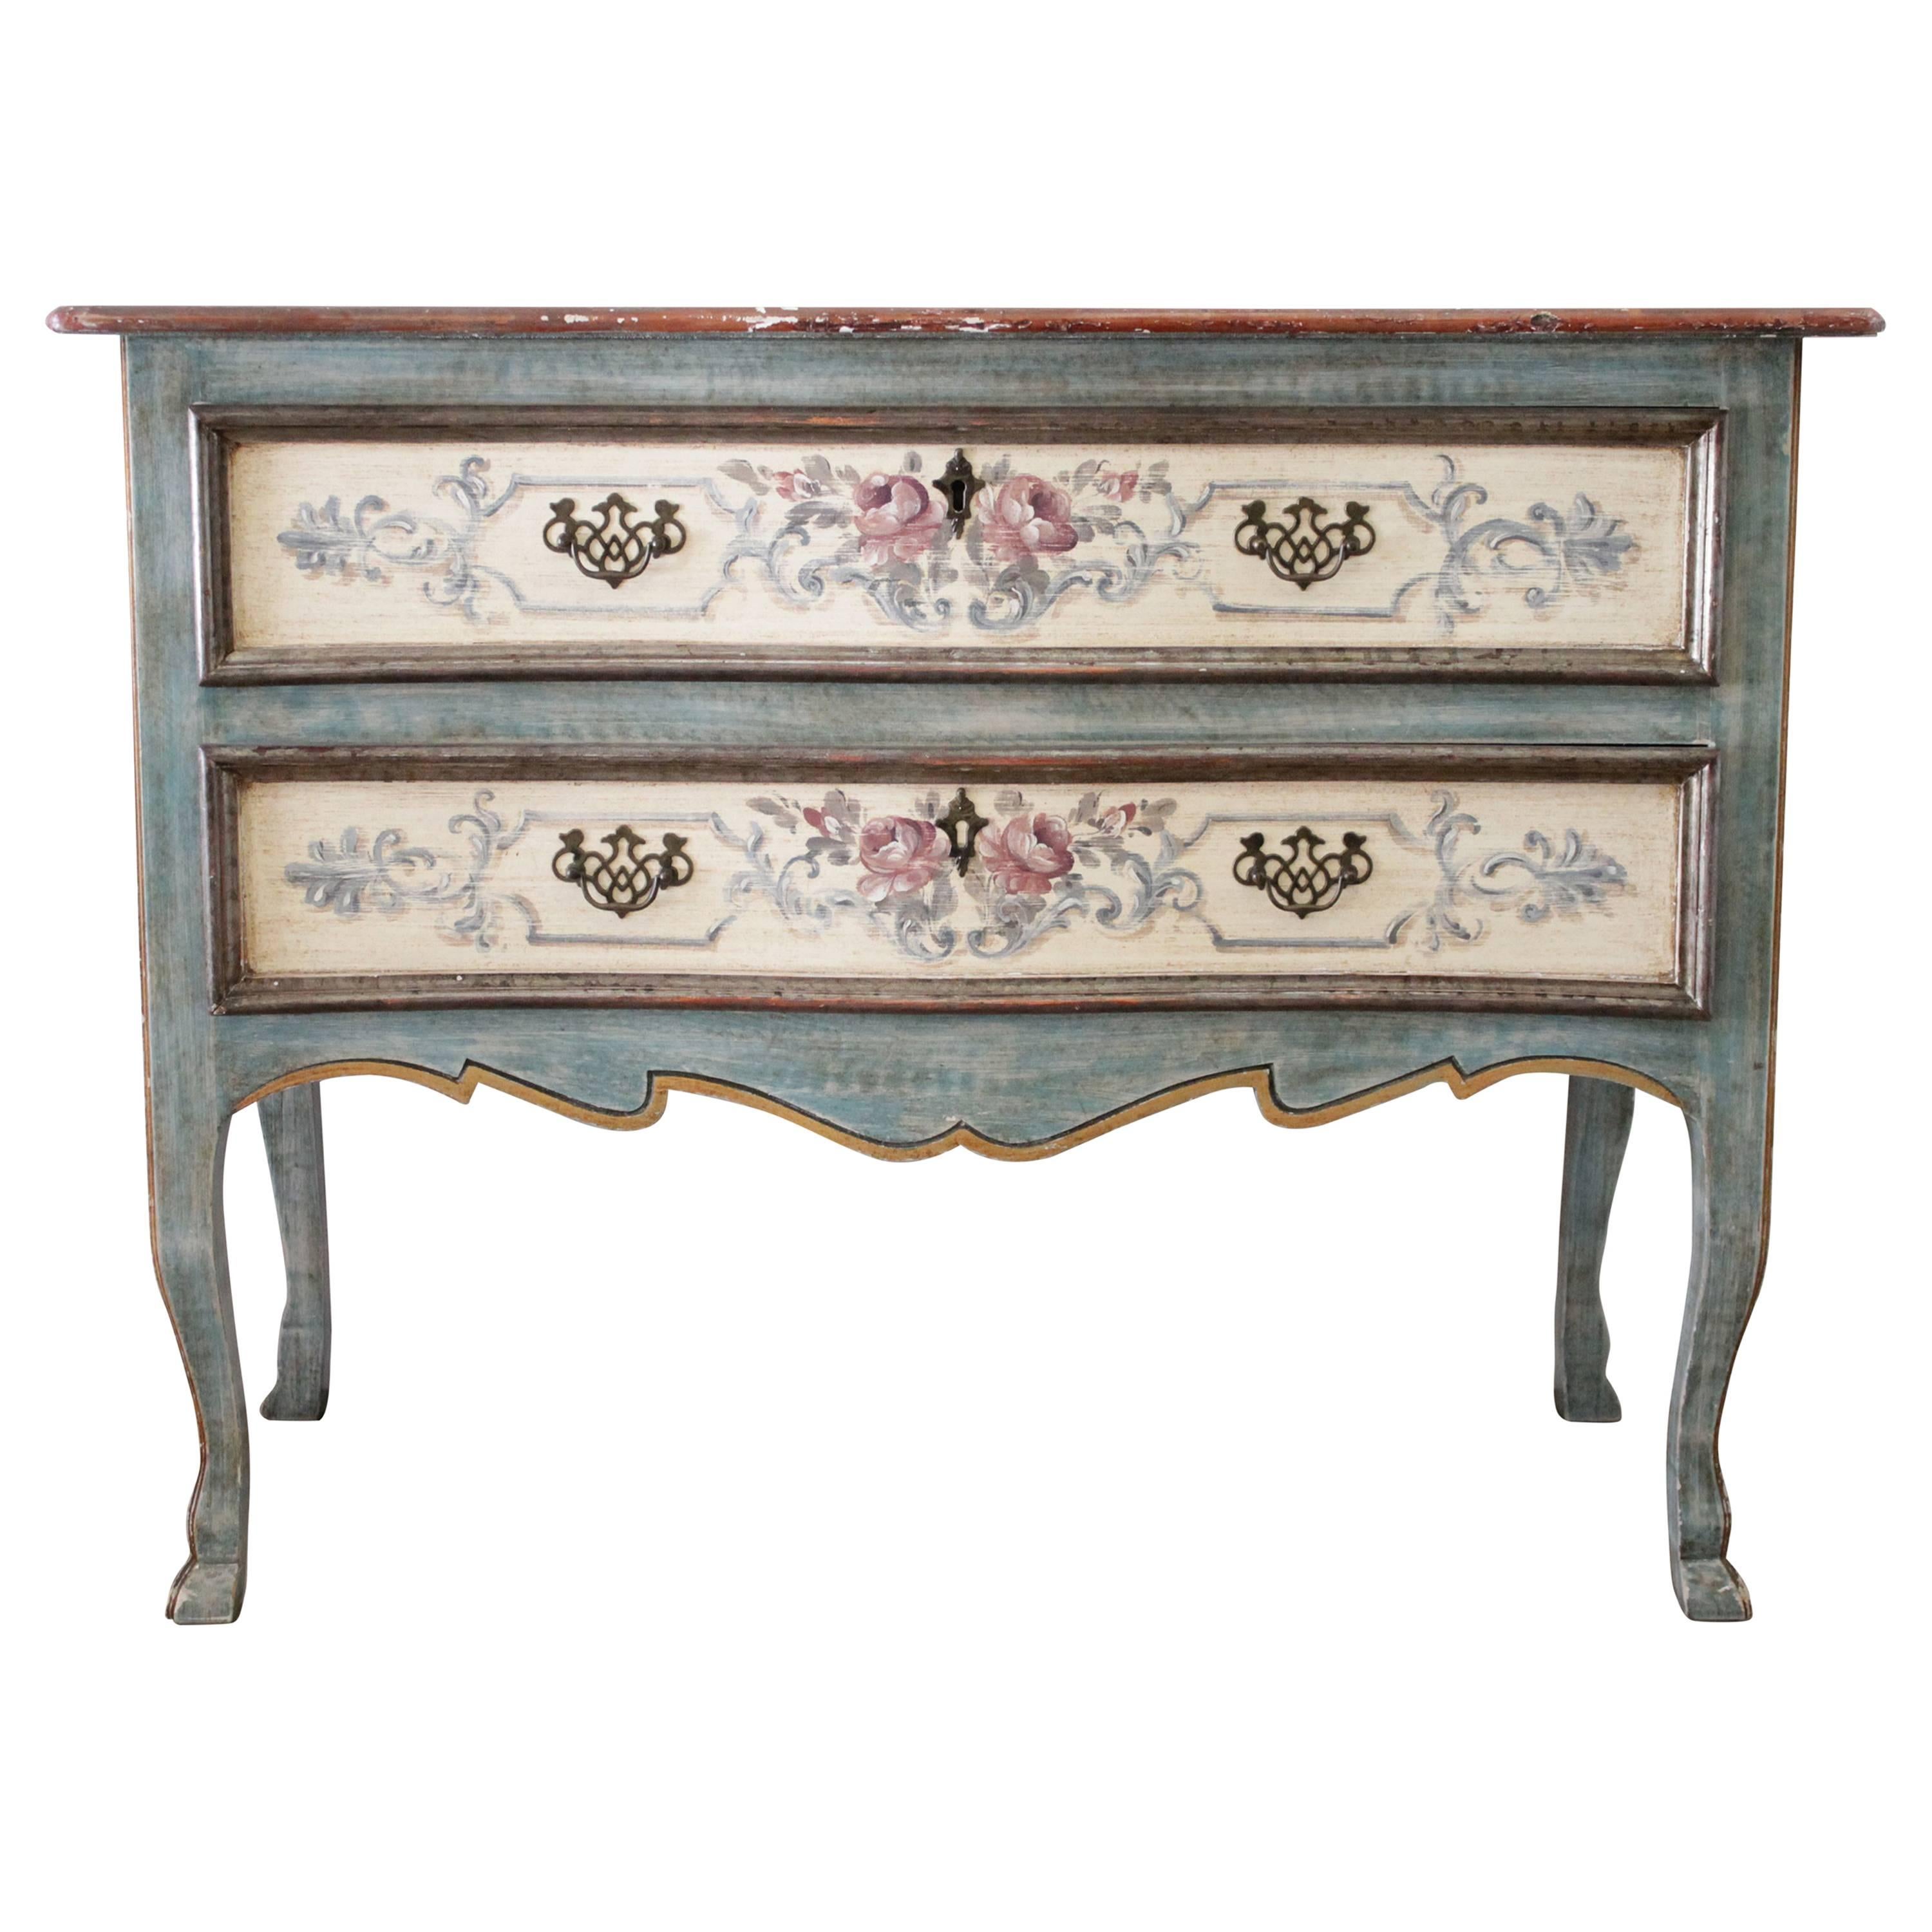 Vintage Italian Hand-Painted Commode